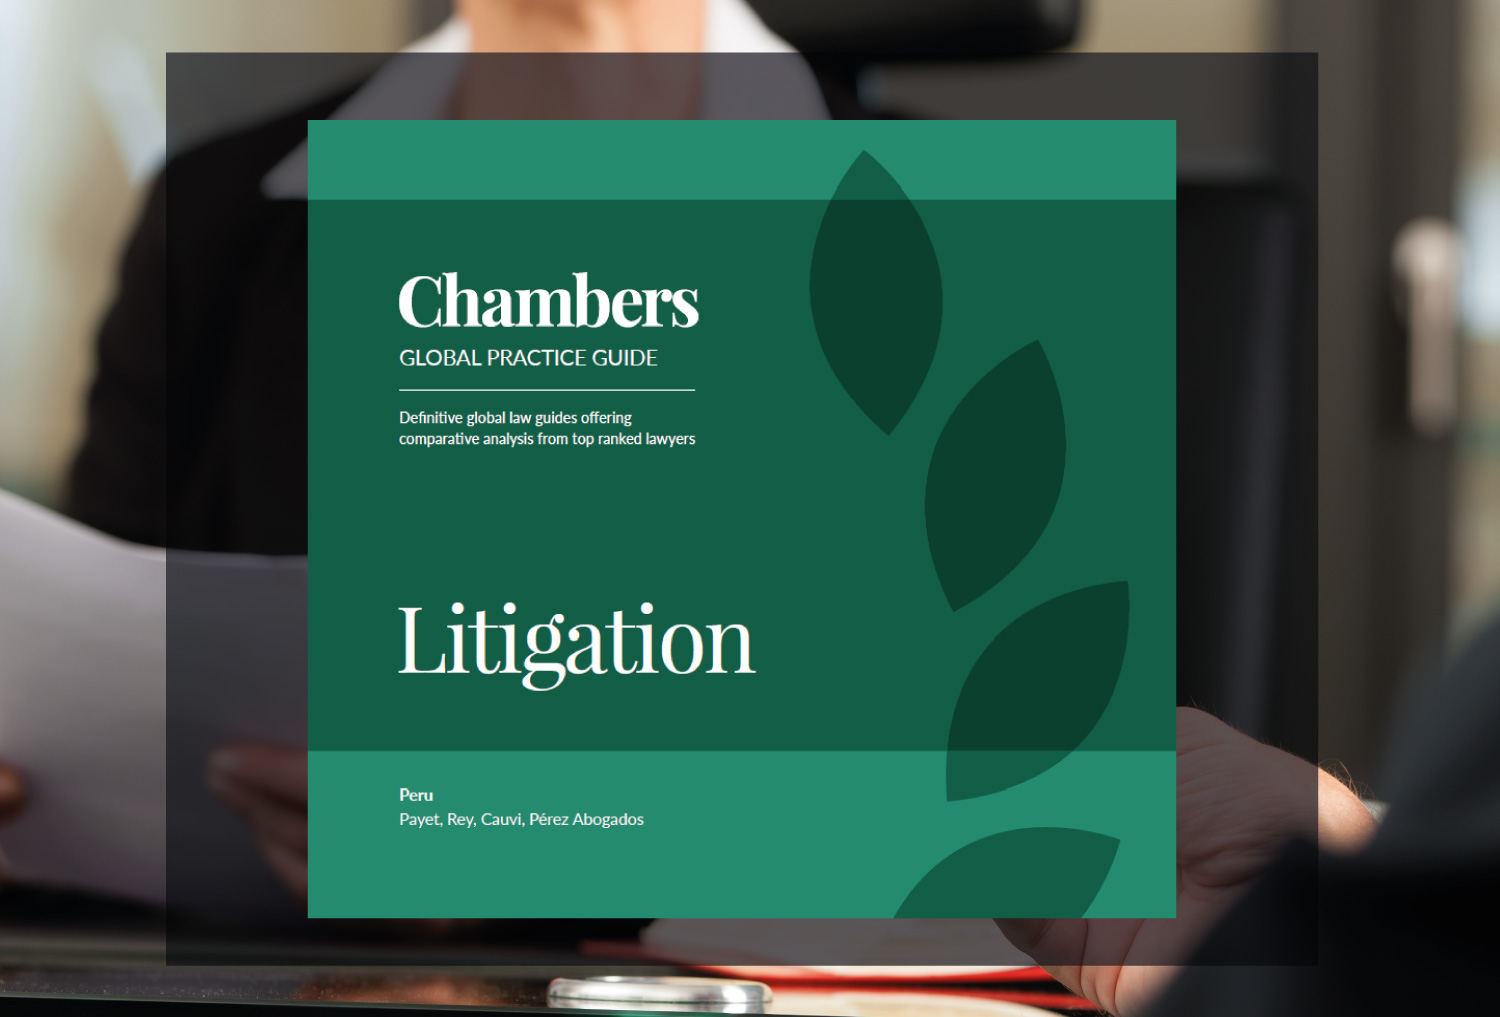 Julio César Pérez and Luis Bustamante collaborated on the Chambers Global Practice Guide 2019: “Litigation”